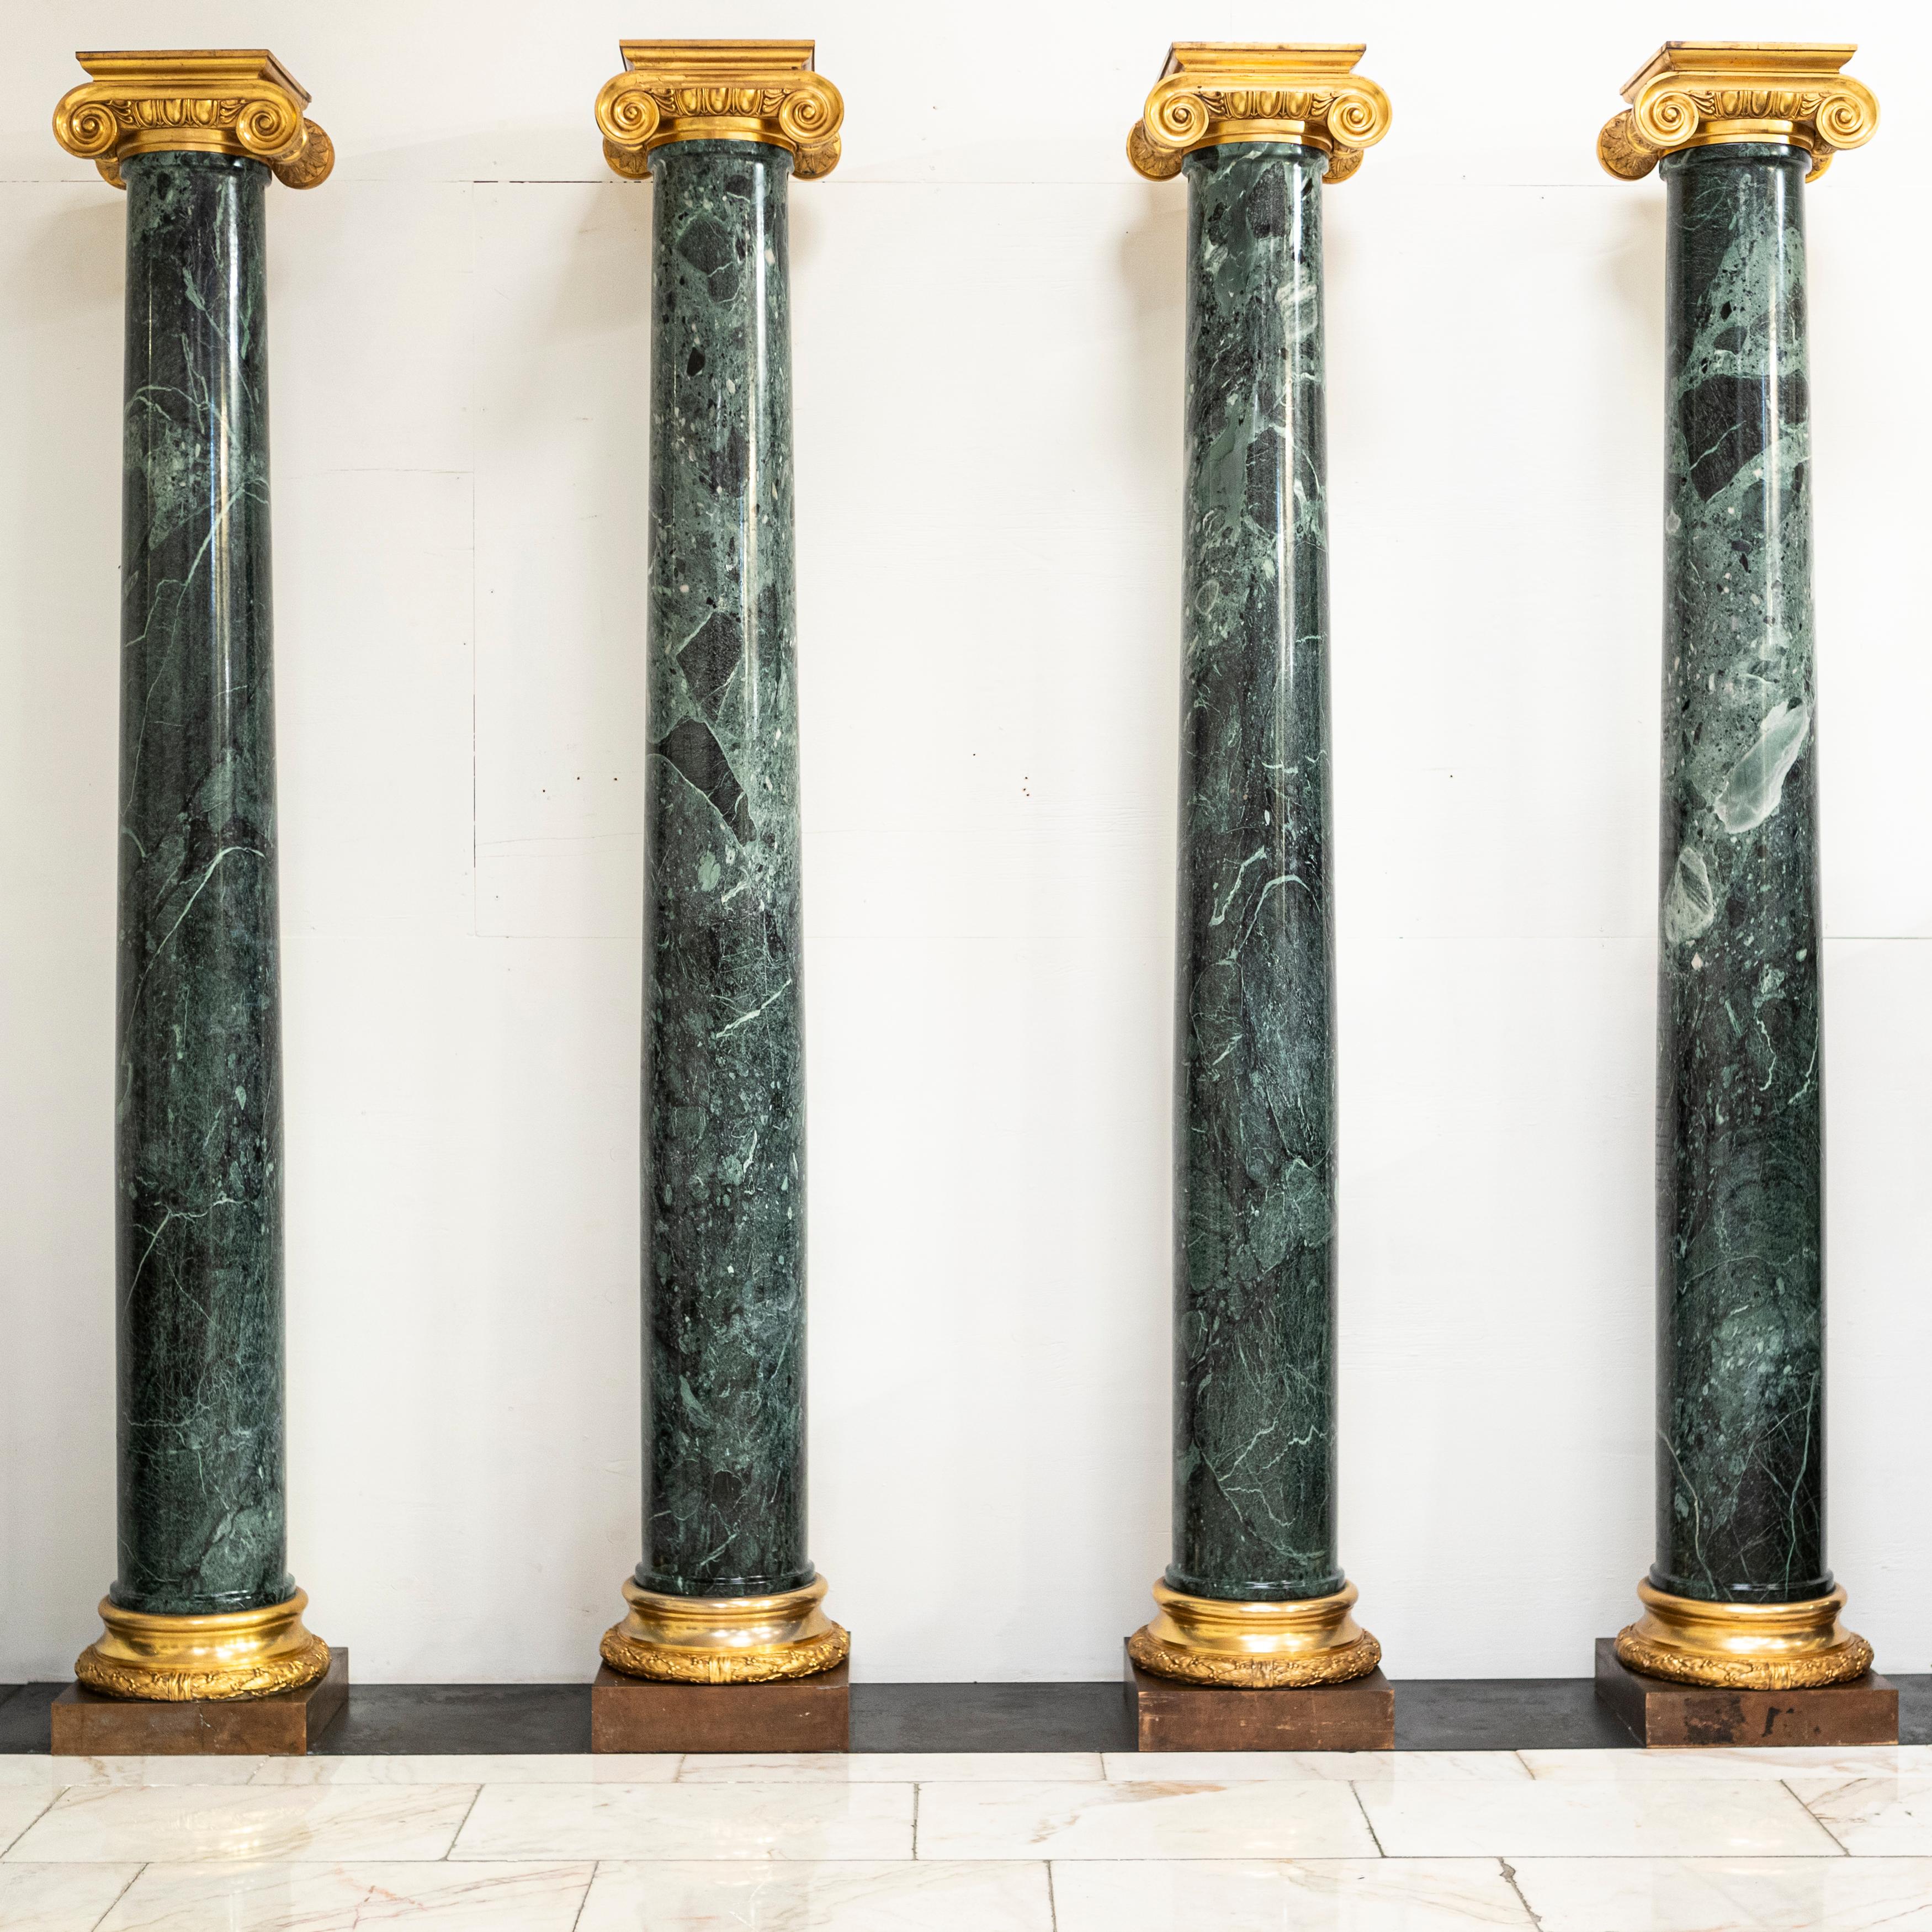 Set of 4 Monumental Capitals Green Verdi Marble Columns  In Good Condition For Sale In Ware, GB